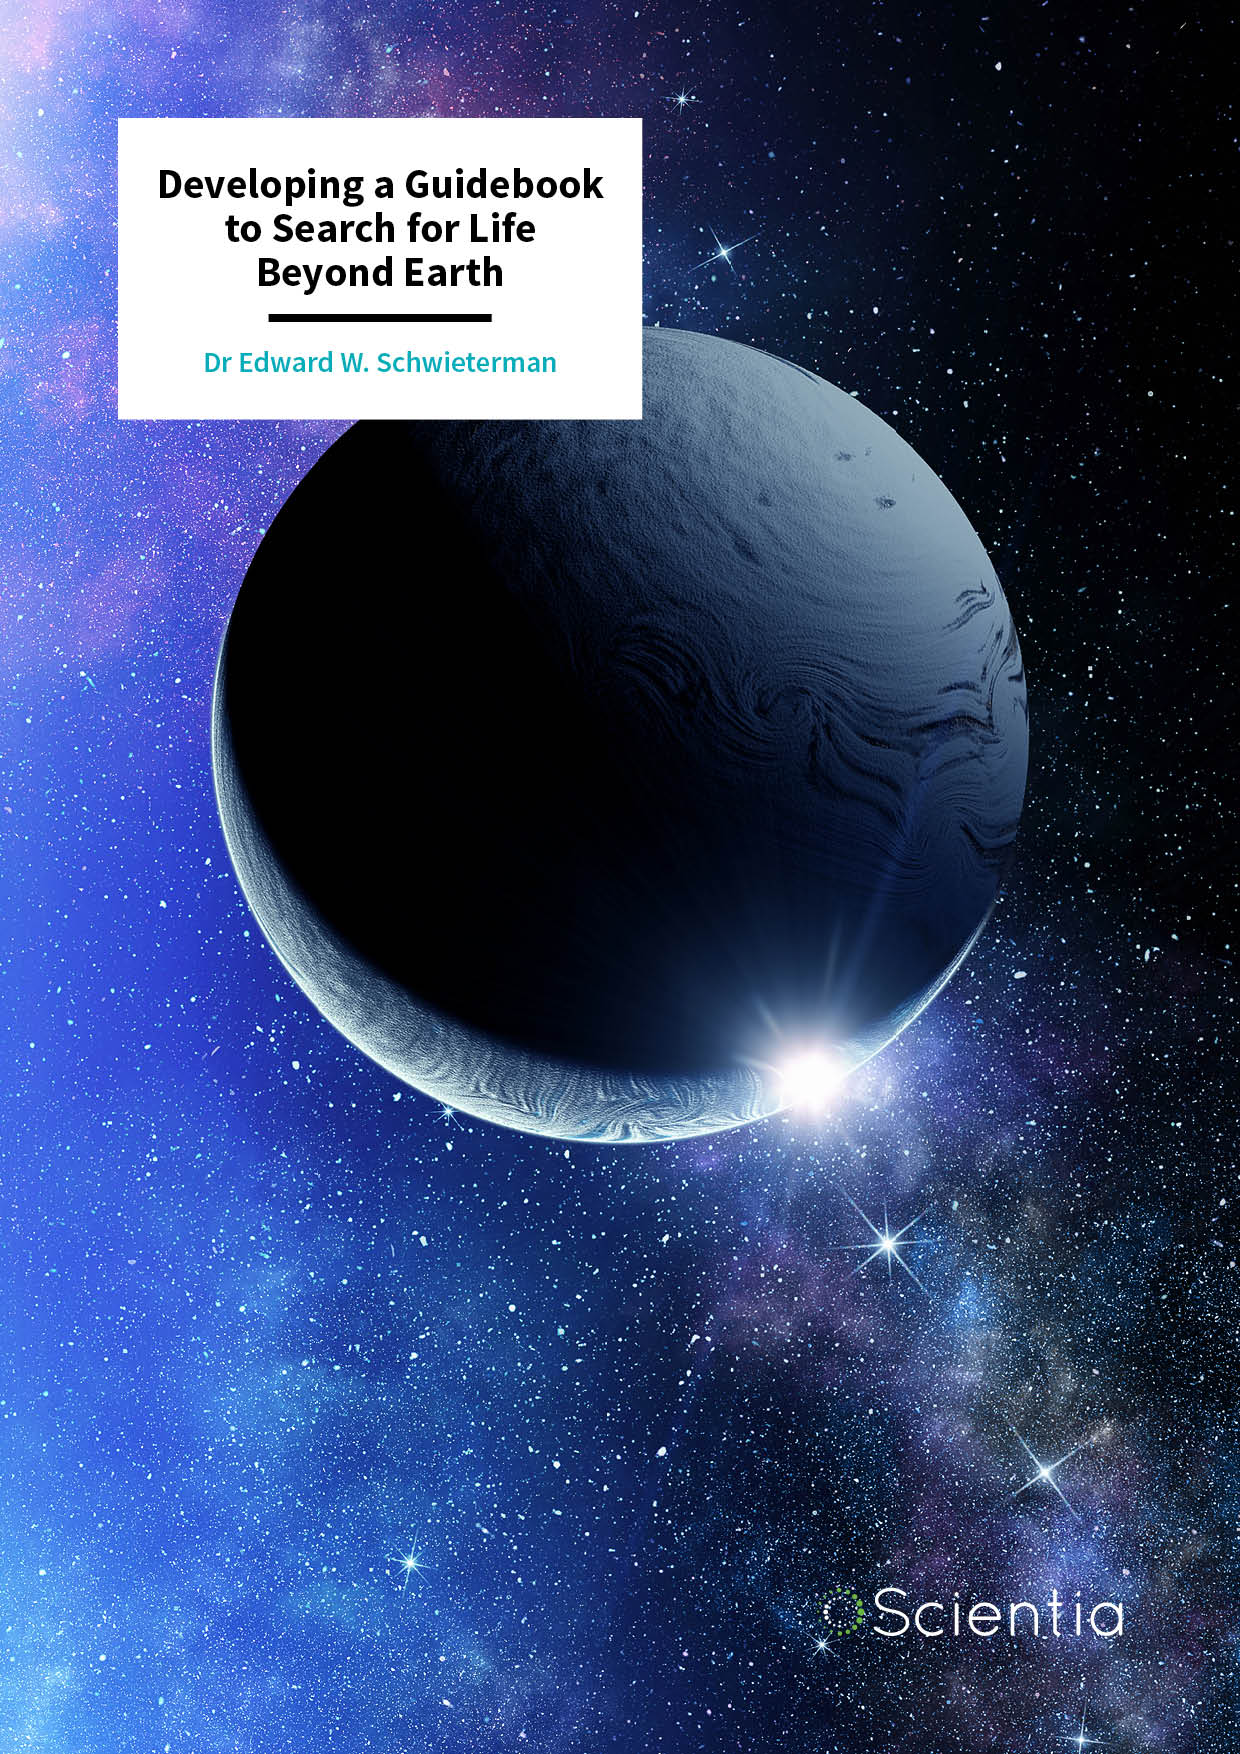 Dr Edward Schwieterman – Developing a Guidebook to Search for Life Beyond Earth